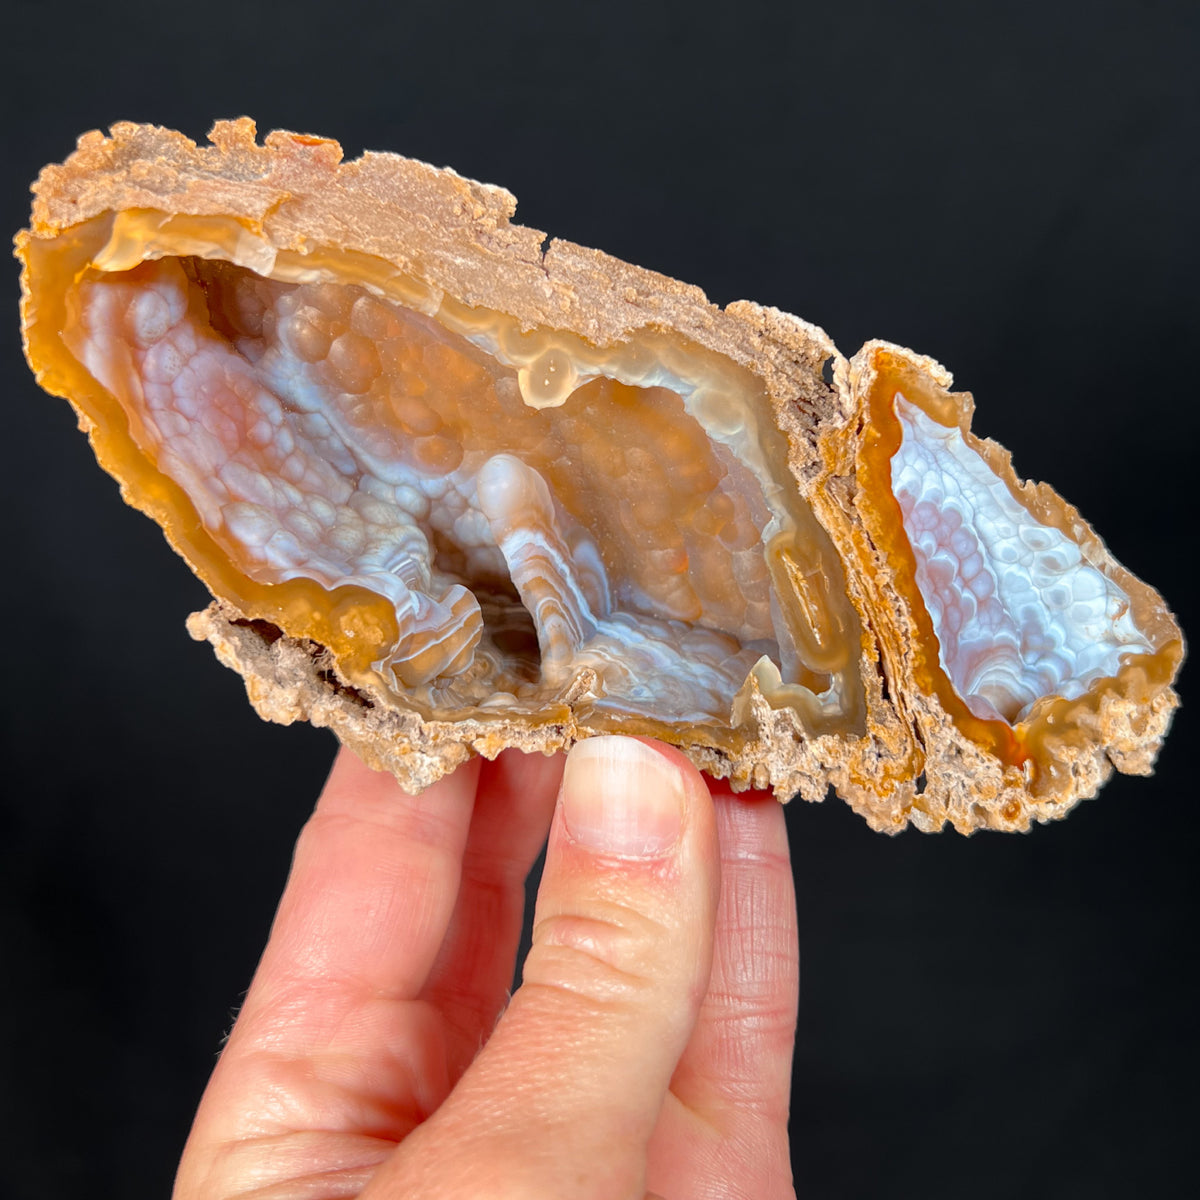 Interior of Fossilized Coral Pair from Florida